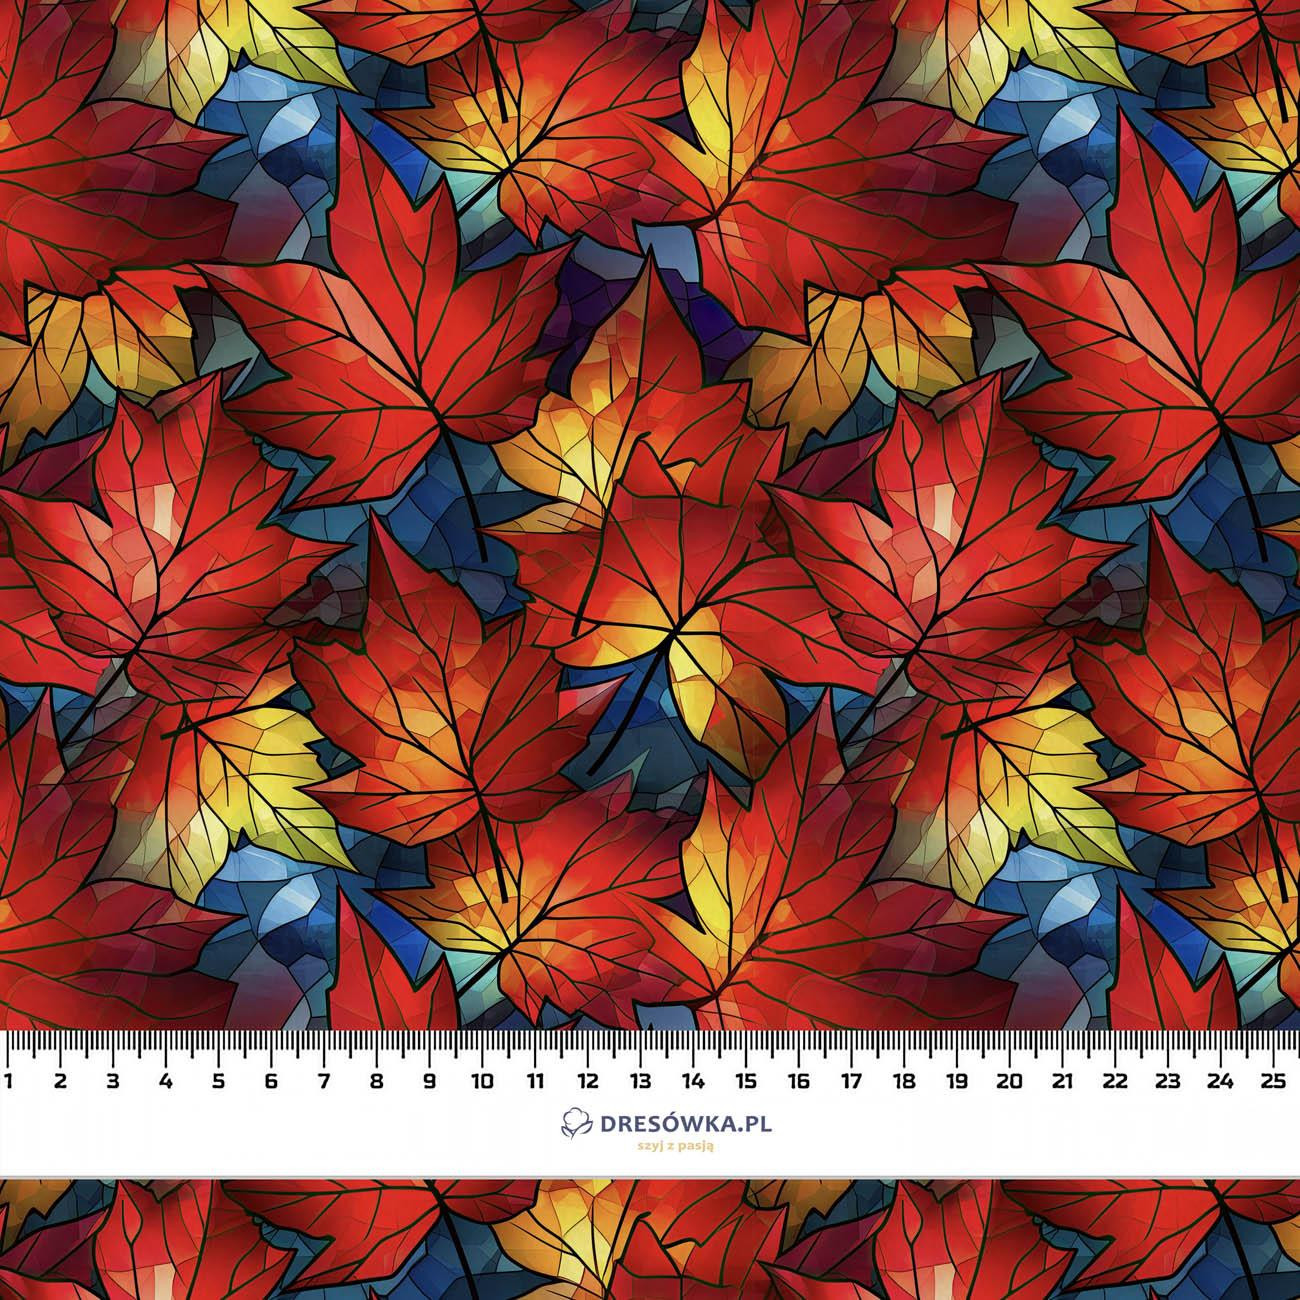 LEAVES / STAINED GLASS PAT. 1 - Waterproof woven fabric